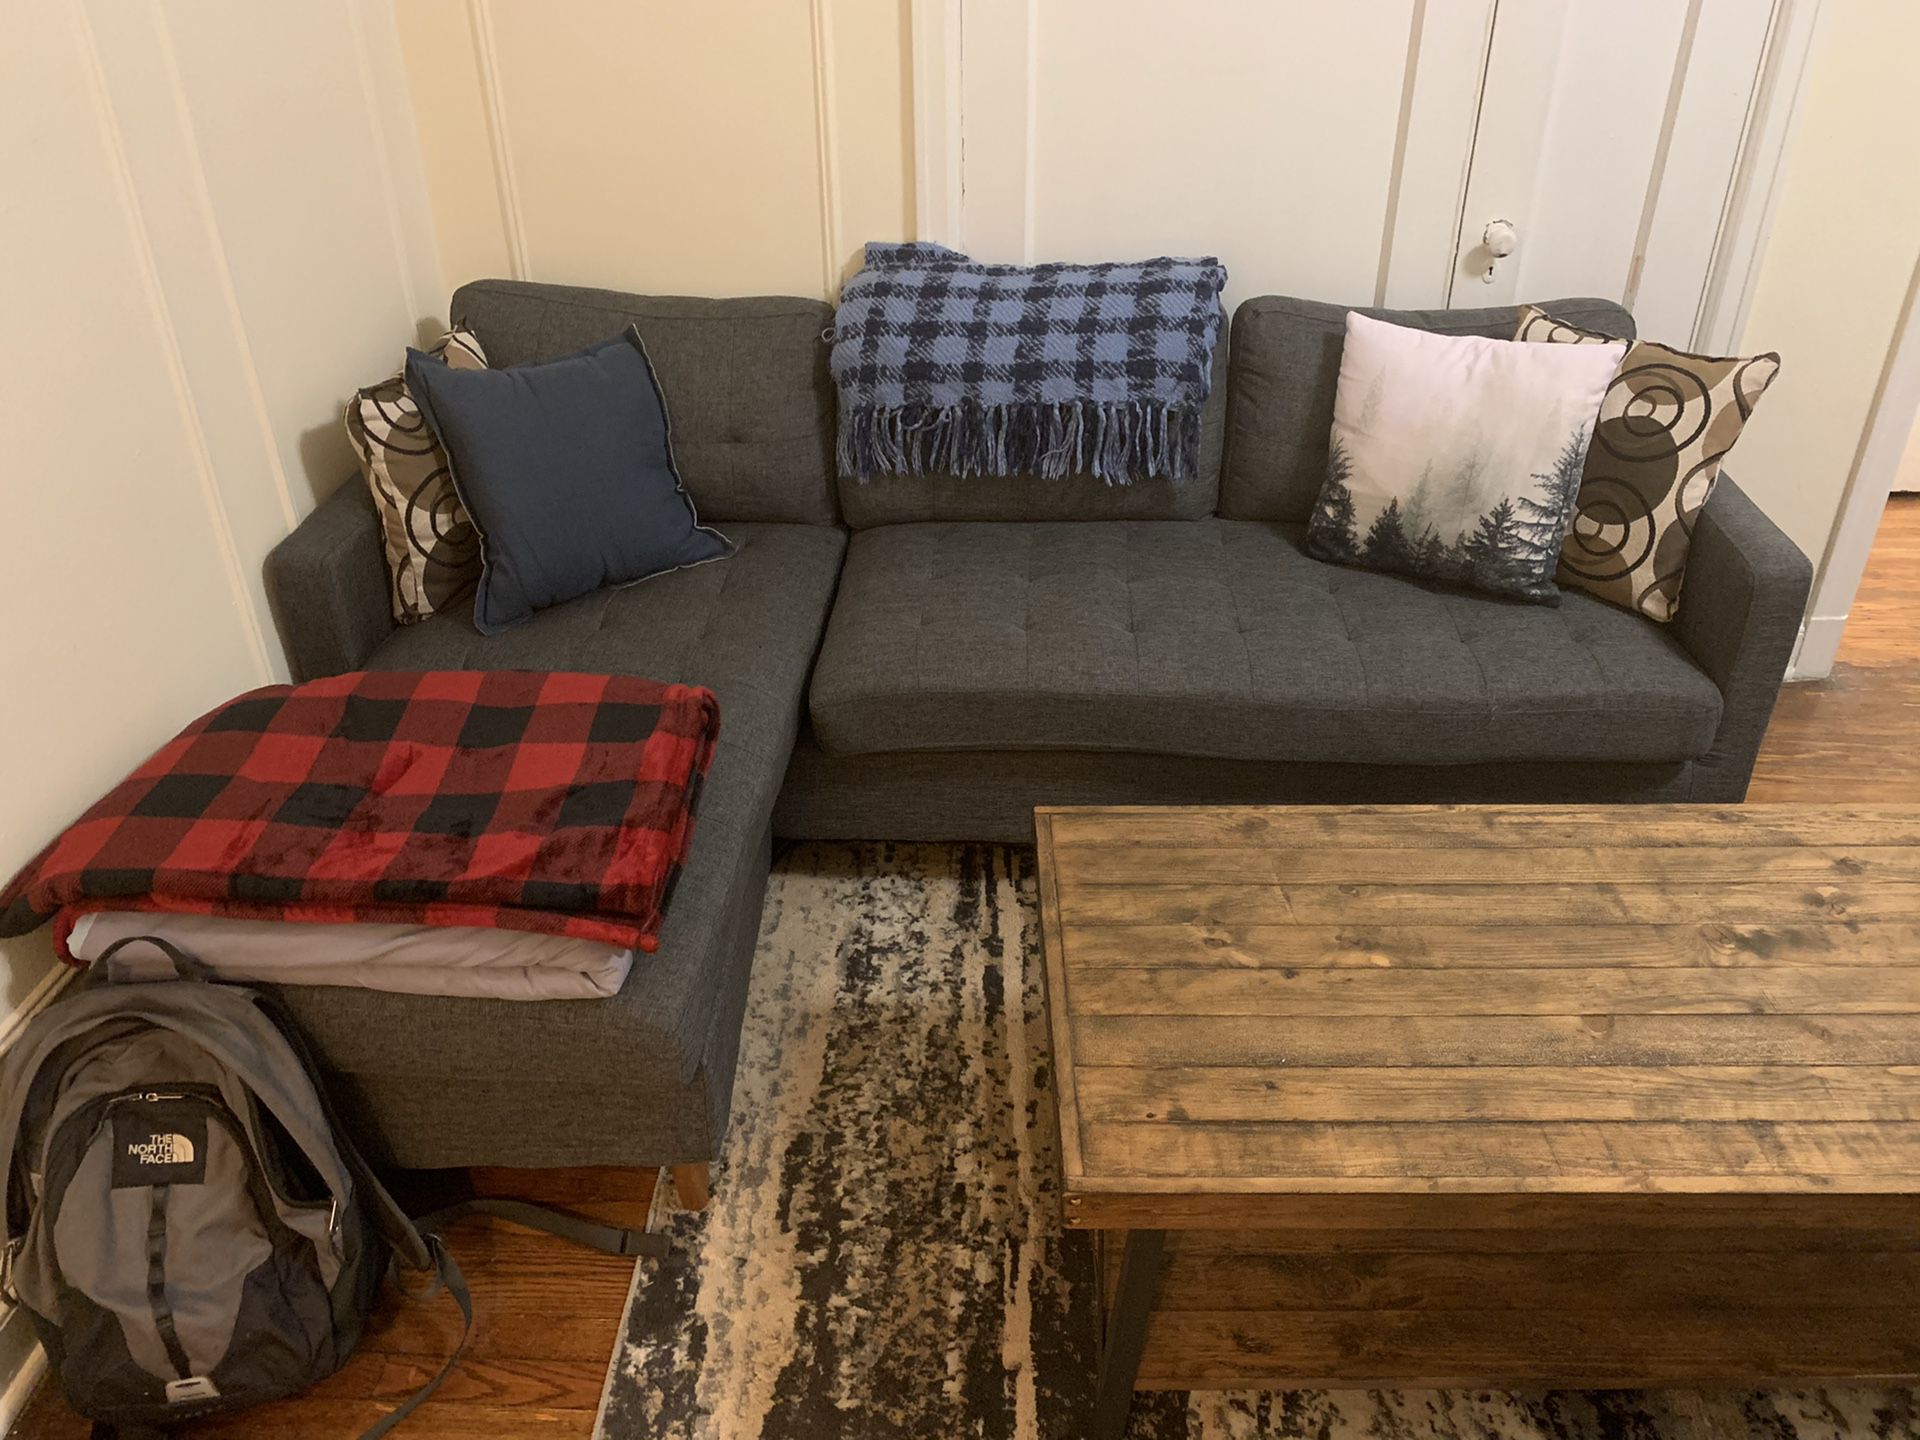 Couch - Great Condition!